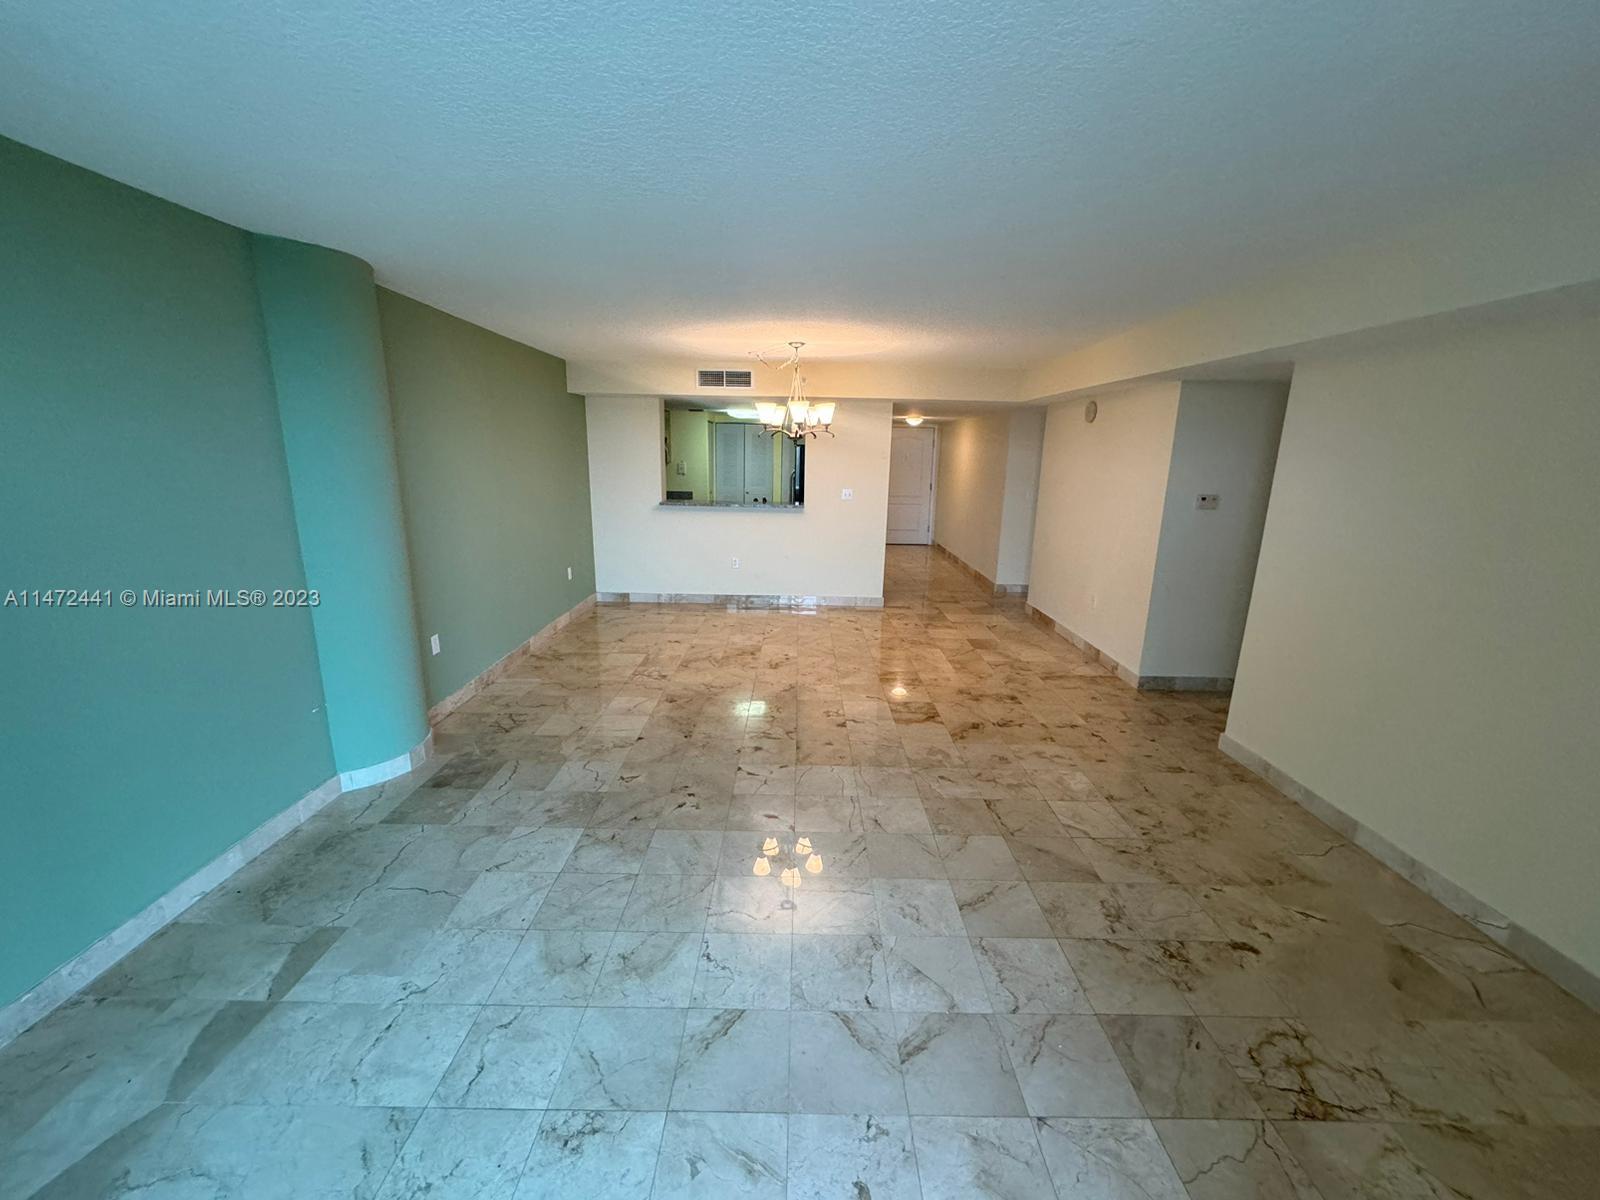 2101 Brickell Ave 1112, Miami, Florida 33129, 2 Bedrooms Bedrooms, ,2 BathroomsBathrooms,Residentiallease,For Rent,2101 Brickell Ave 1112,A11472441